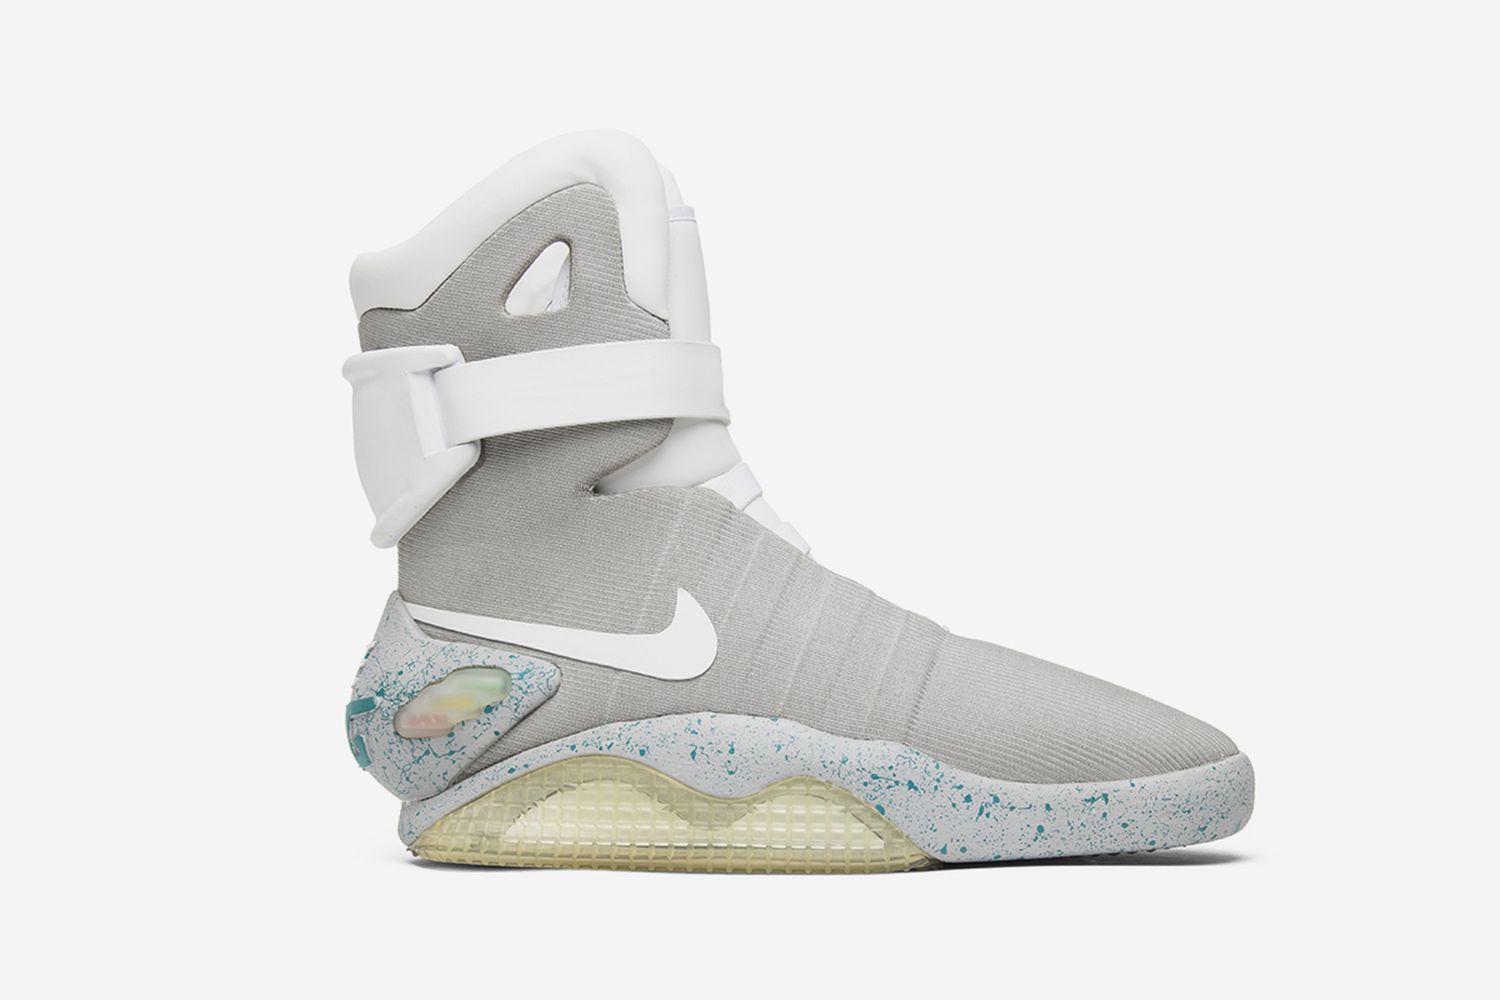 Nike Mag "Back To The Future"